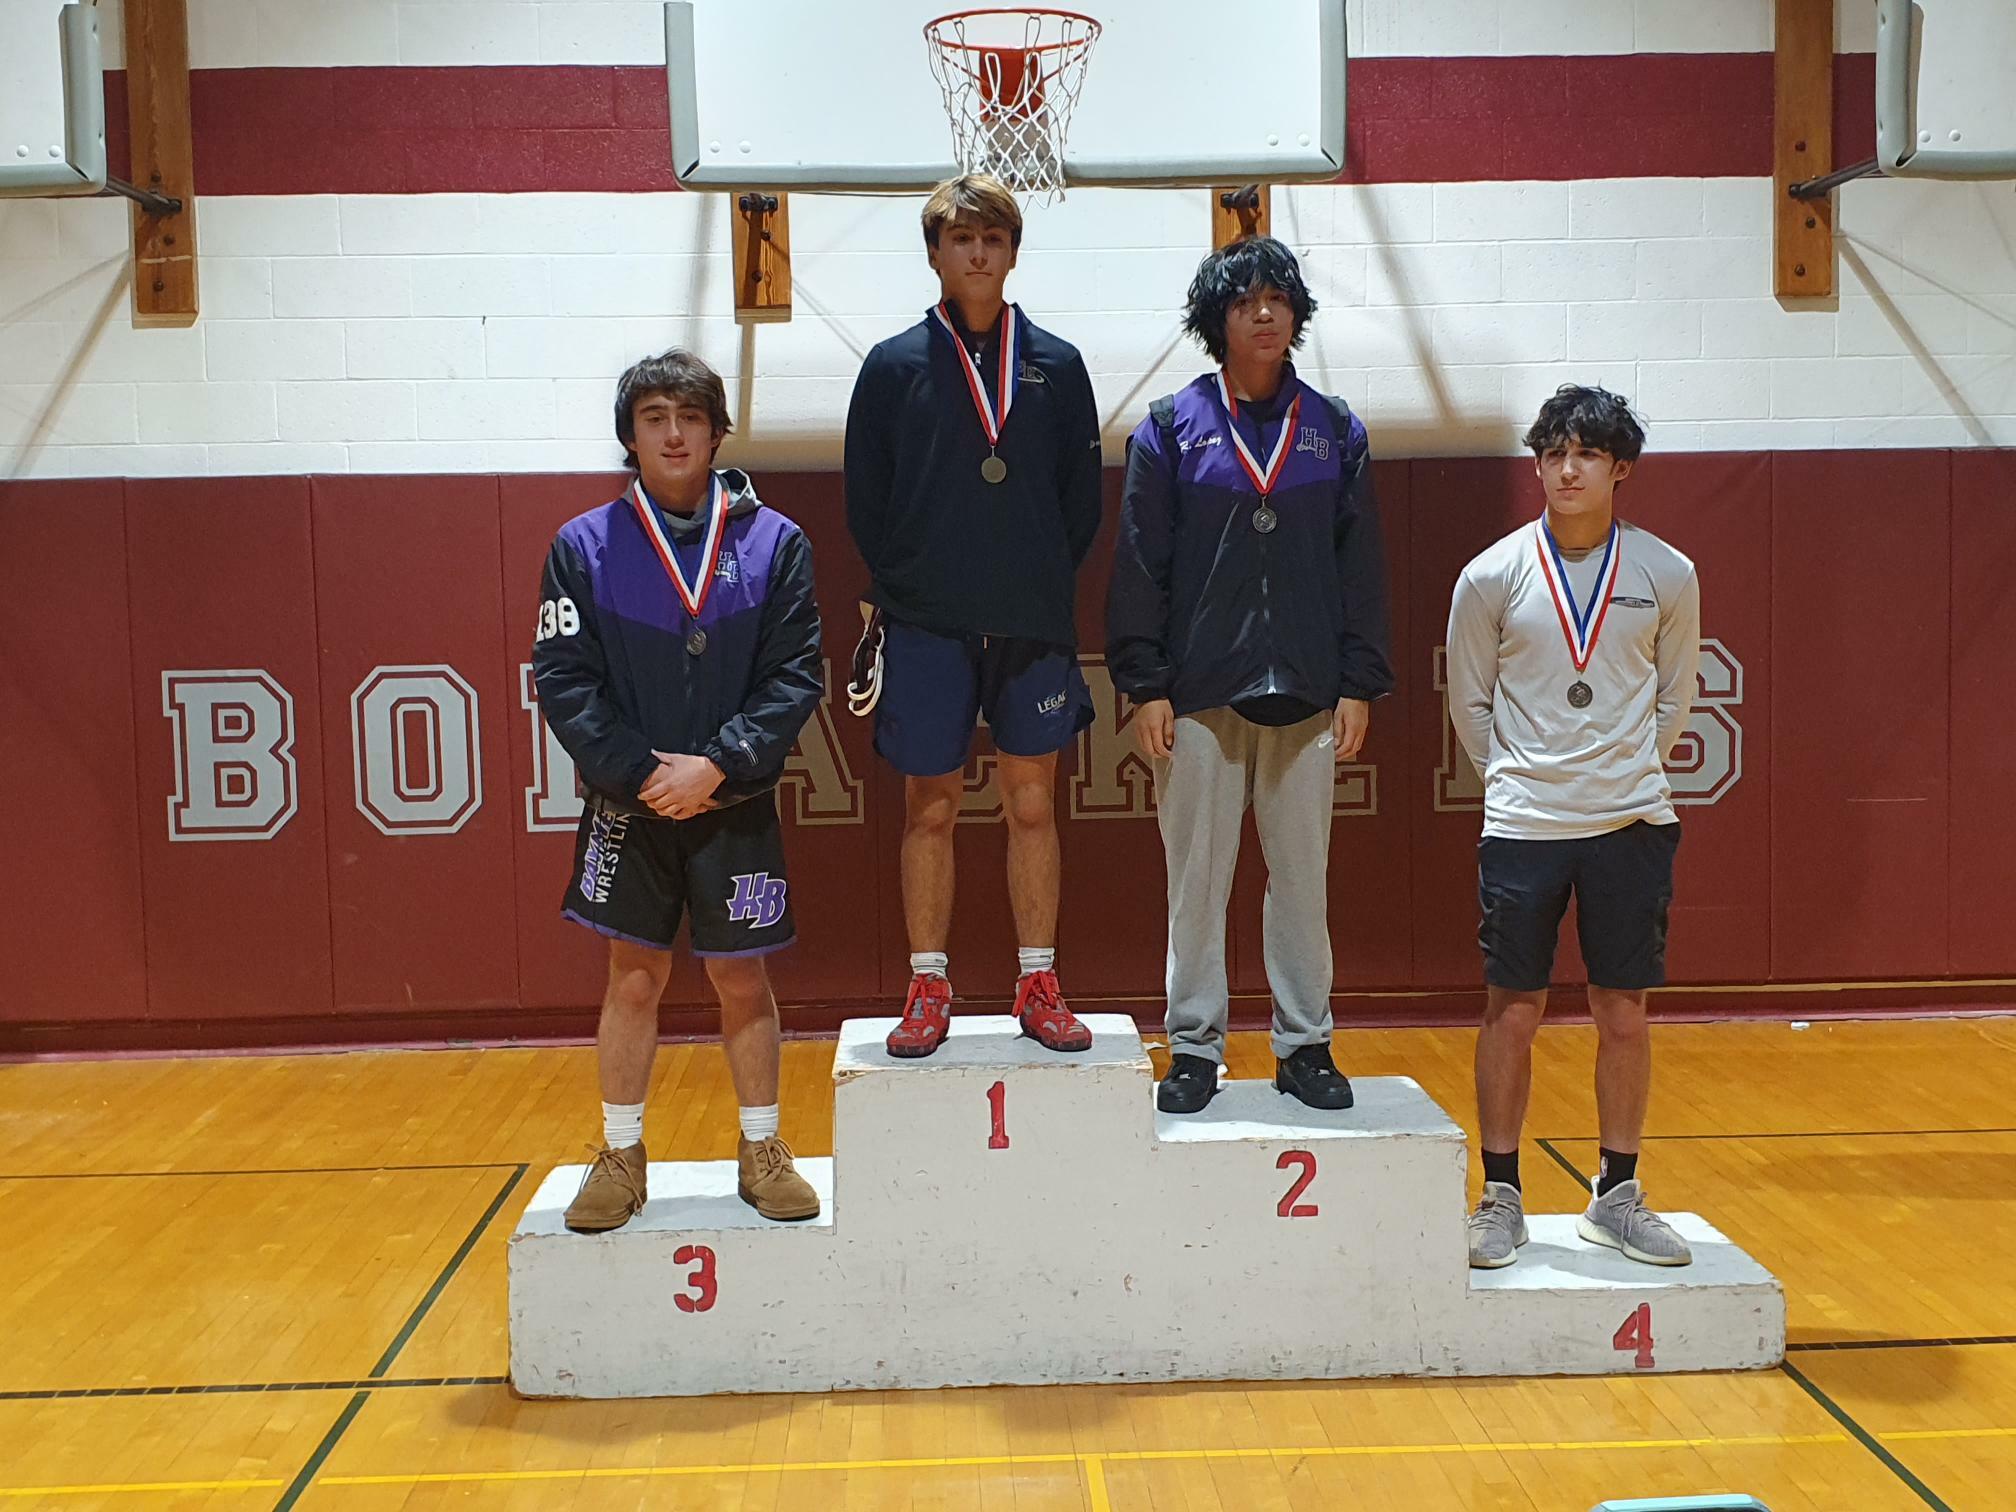 Raul Lopez and Zach Bahamondes placed second and third, respectfully, at 138 pounds on Saturday.